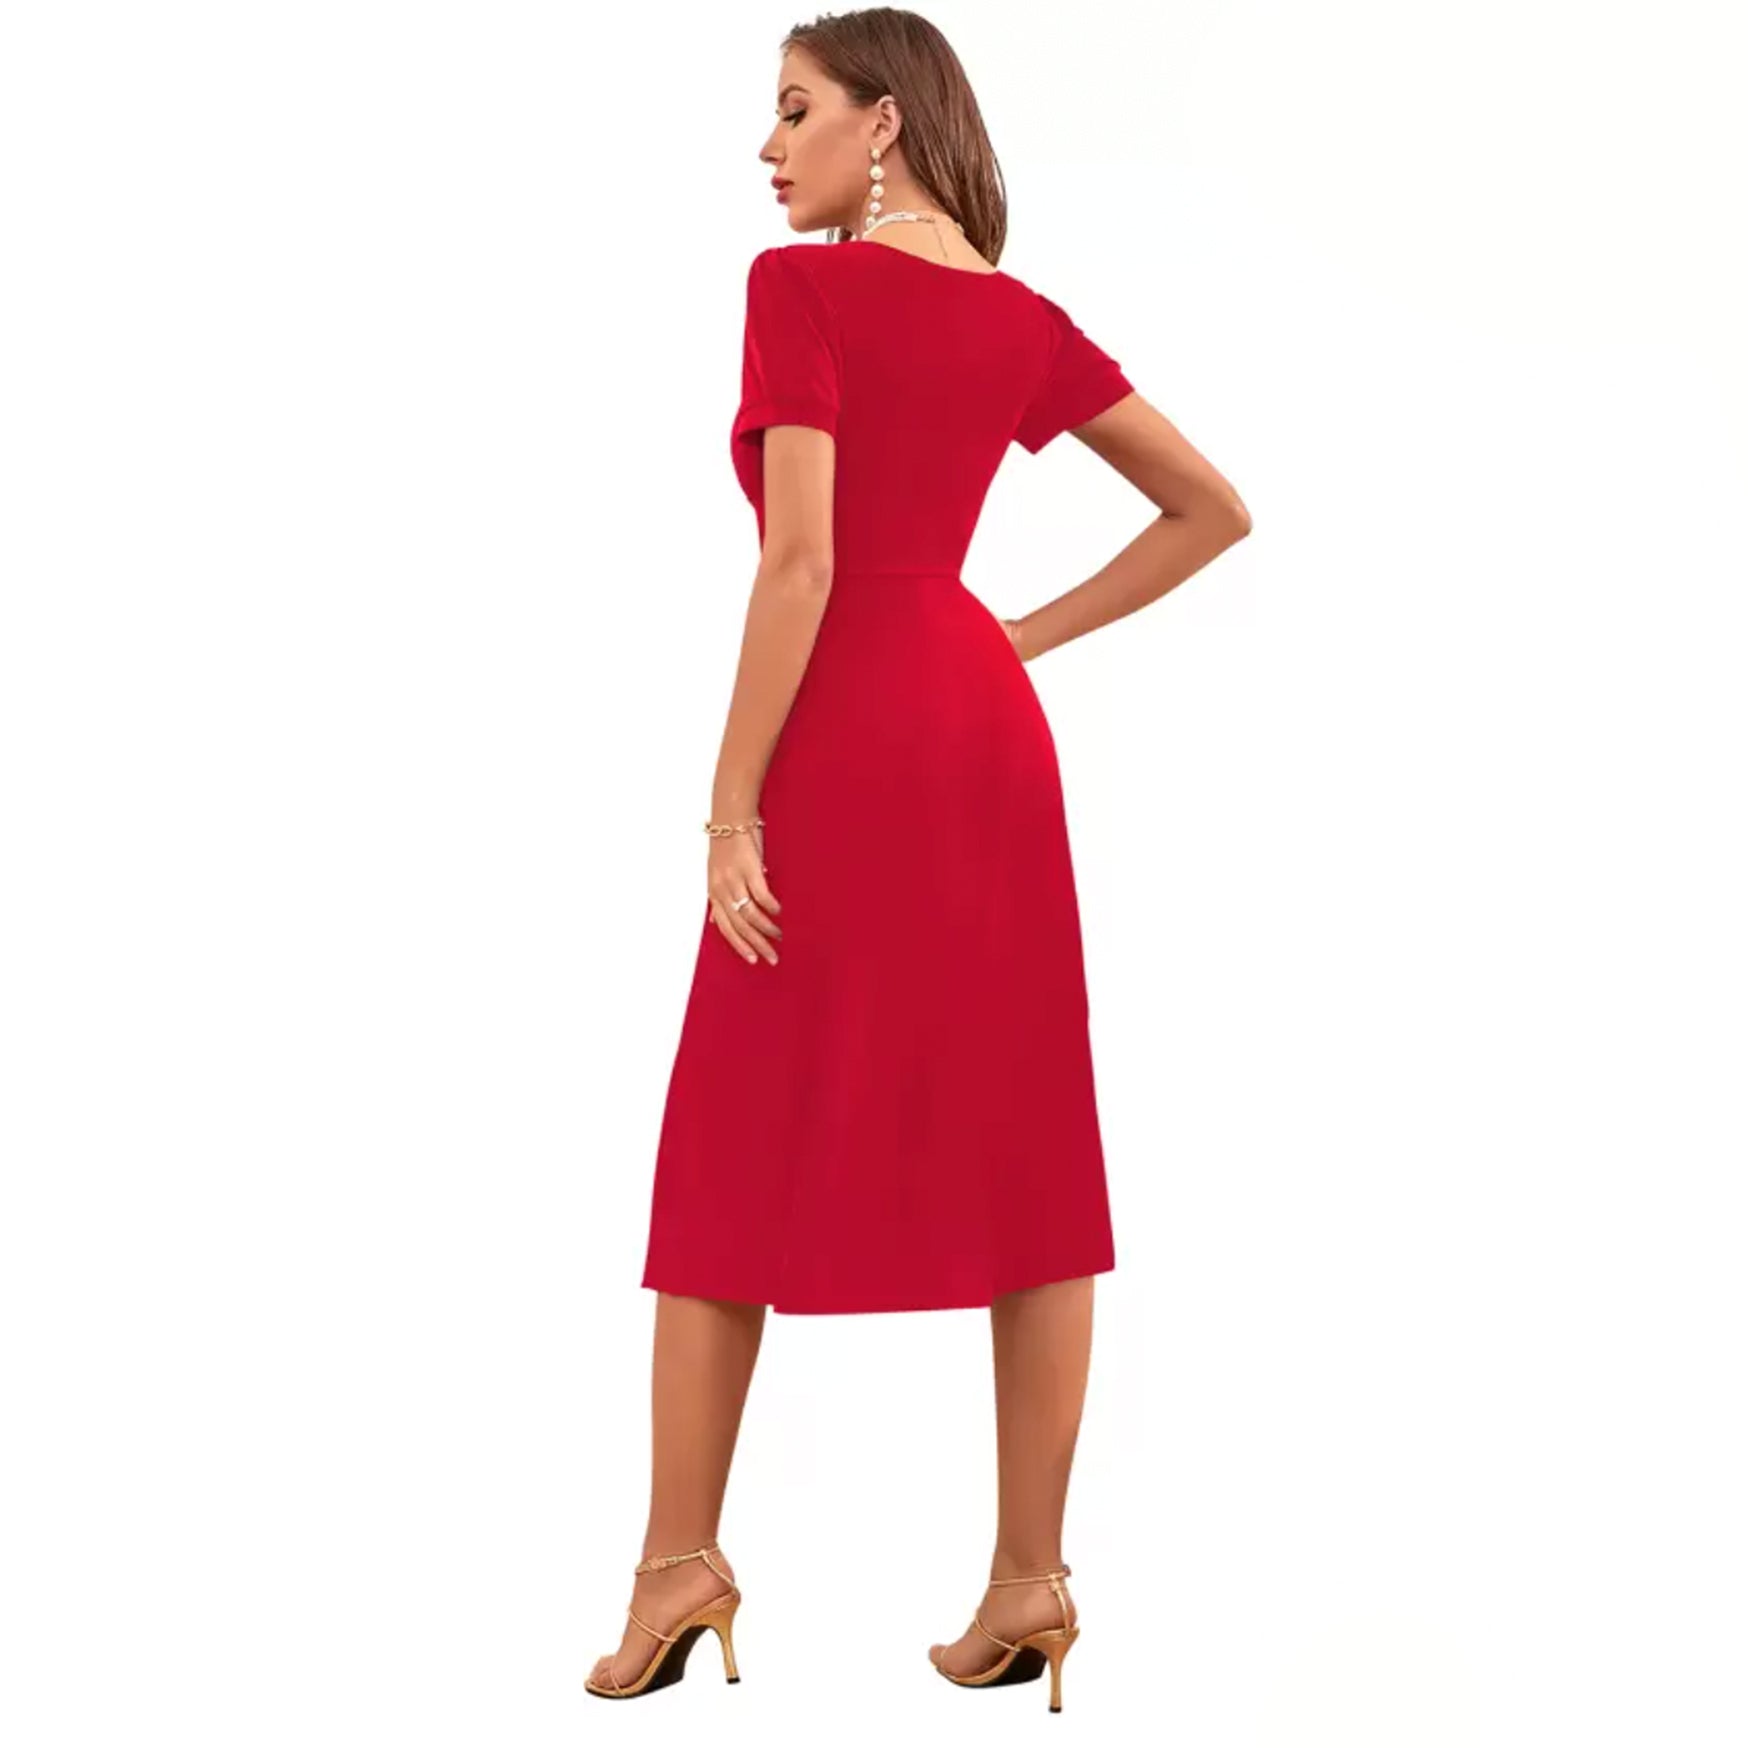 TESSAVEGAS Women Fit and Flare Red Dress